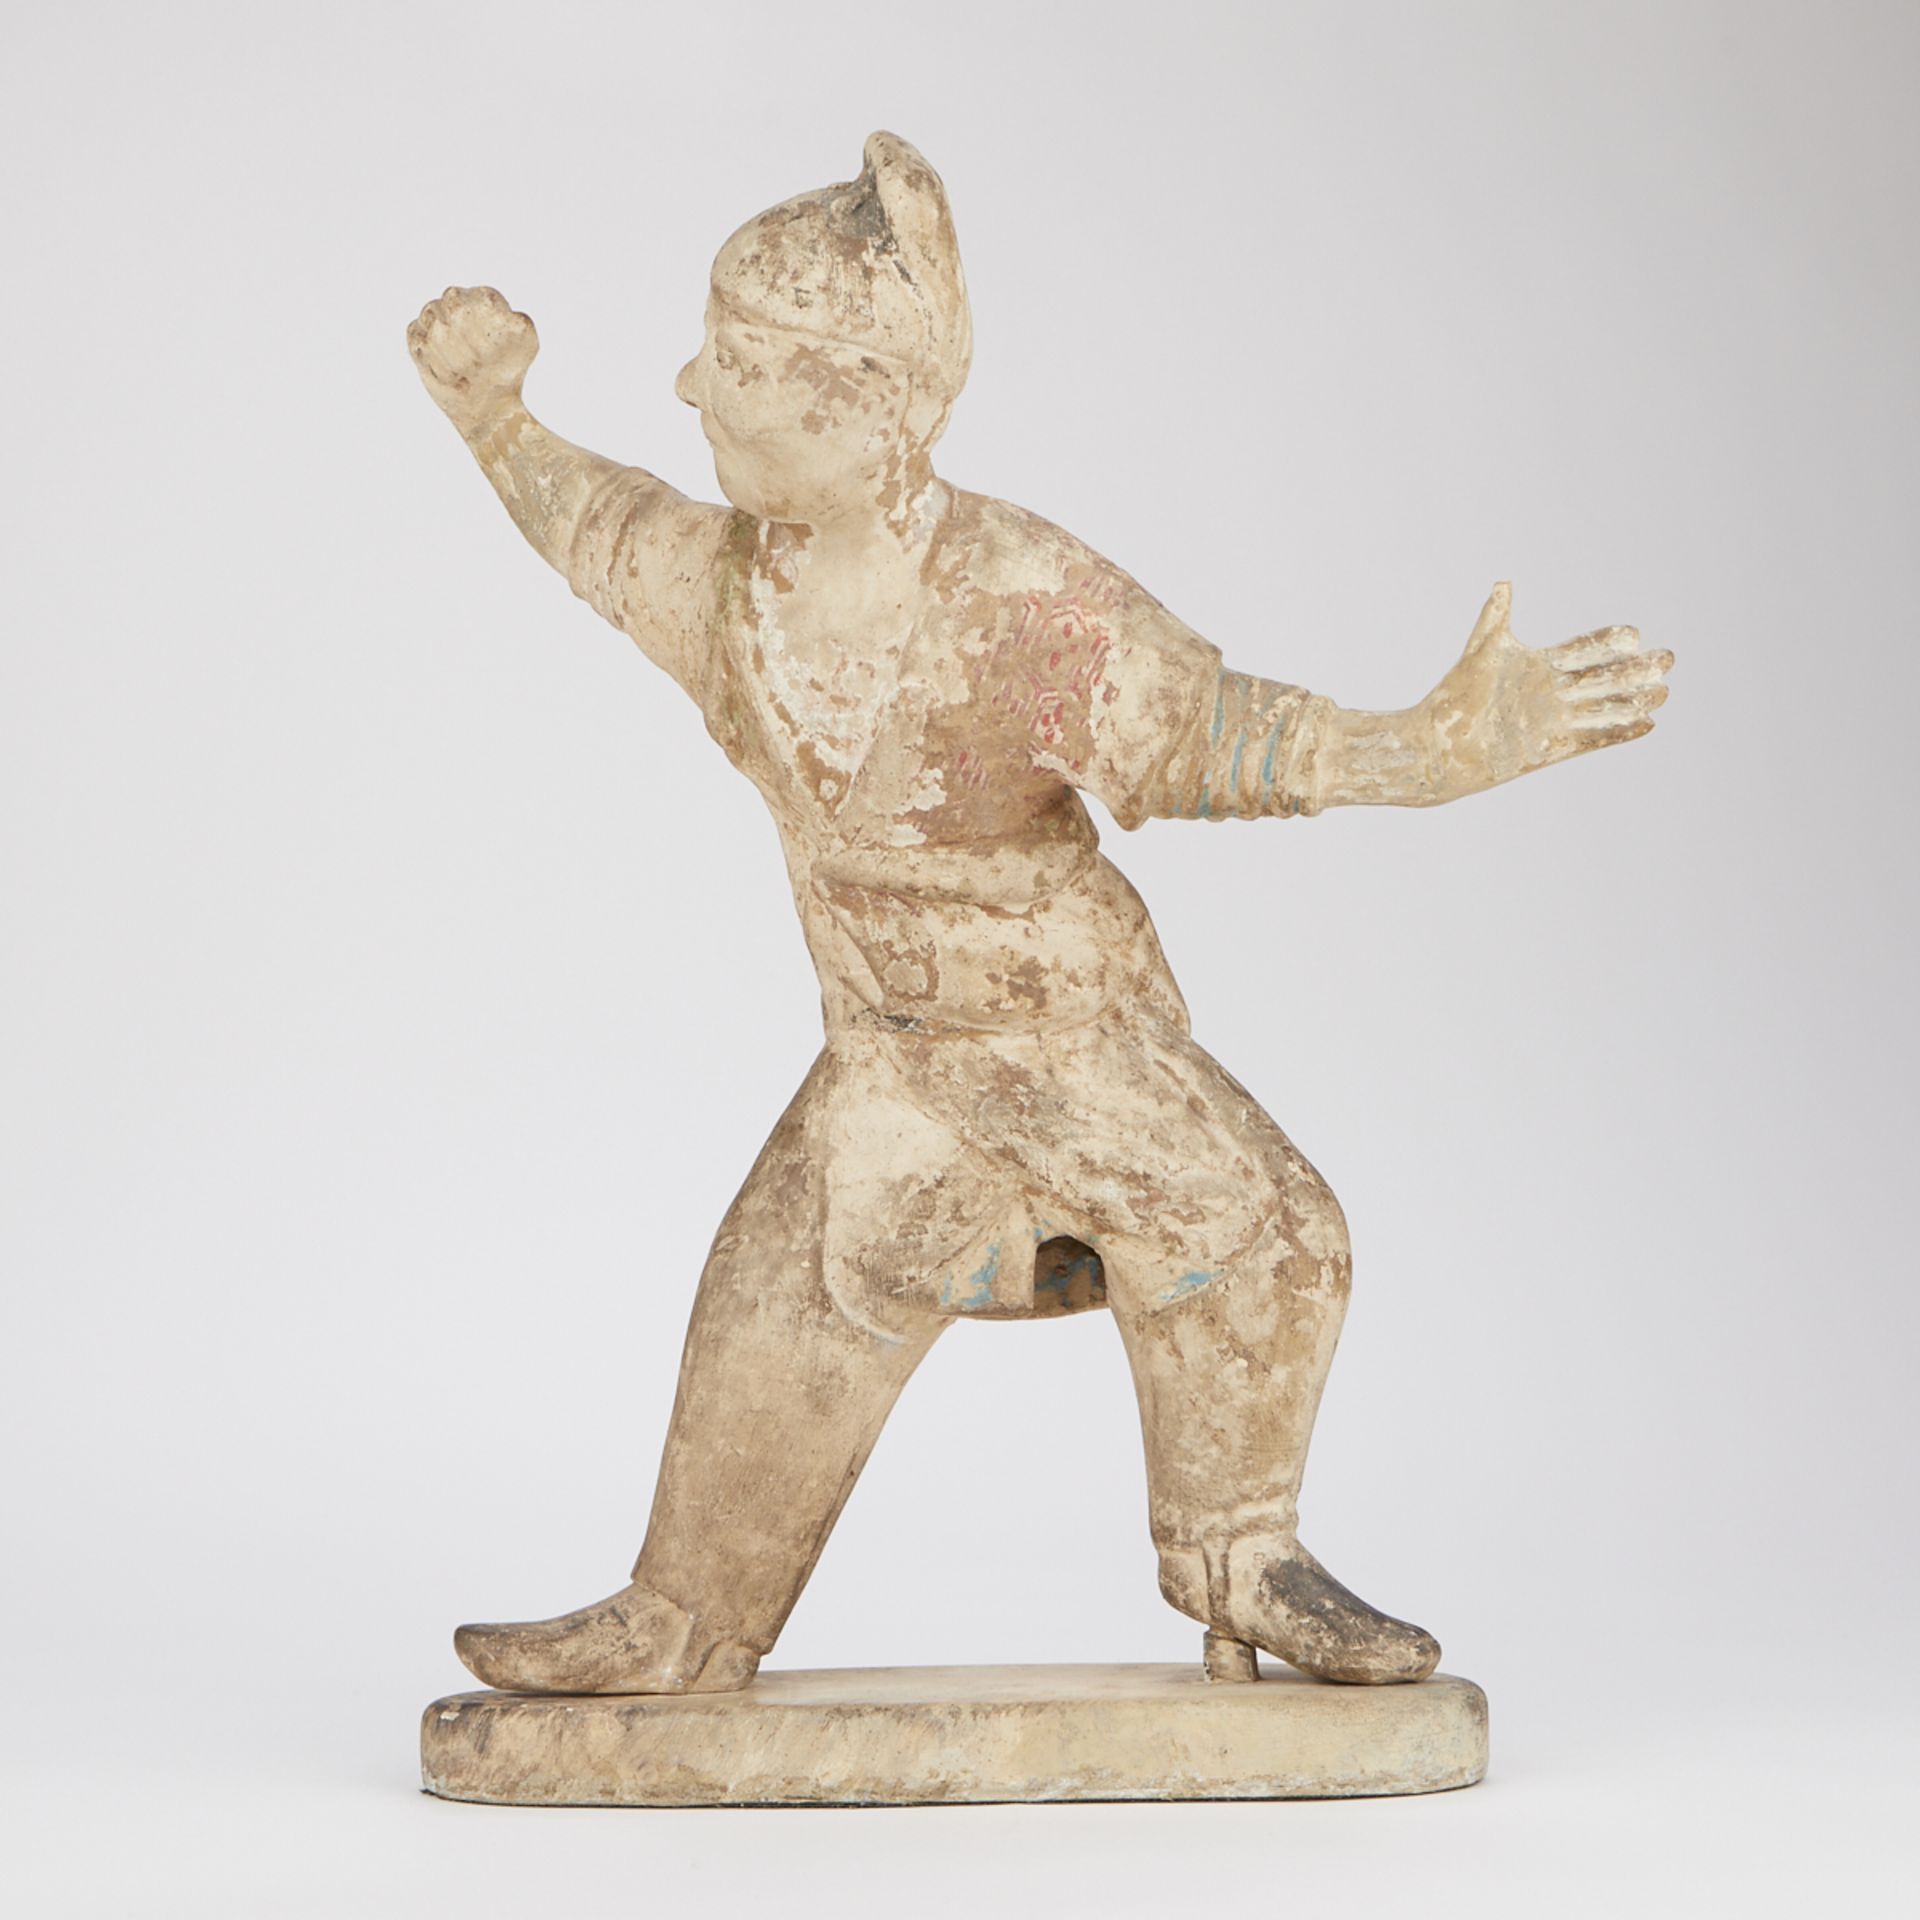 Early Chinese Terracotta Warrior - Image 2 of 10